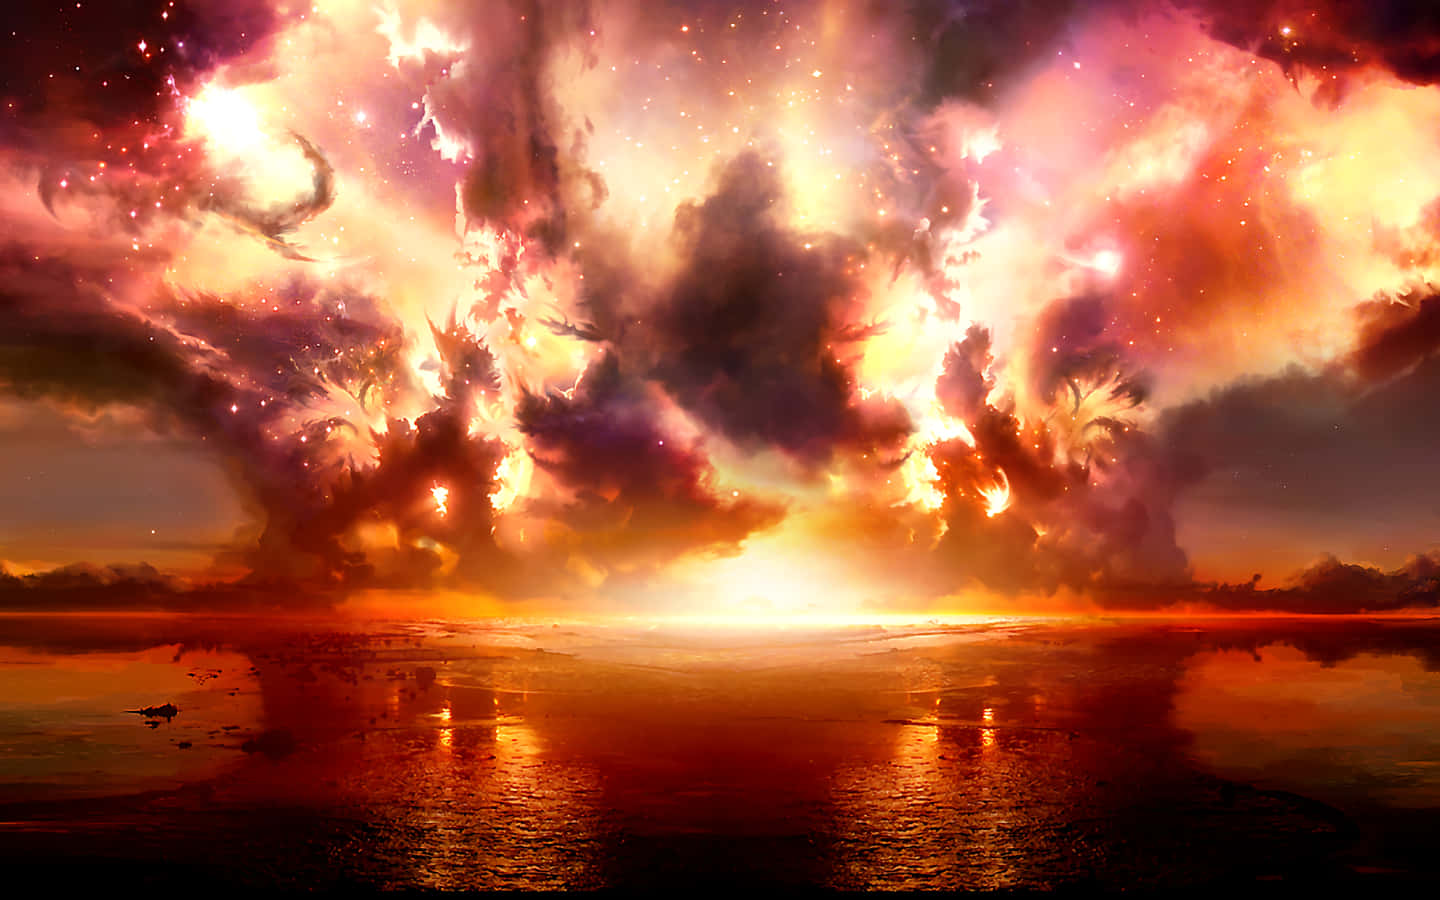 An Explosion In The Sky Over Water